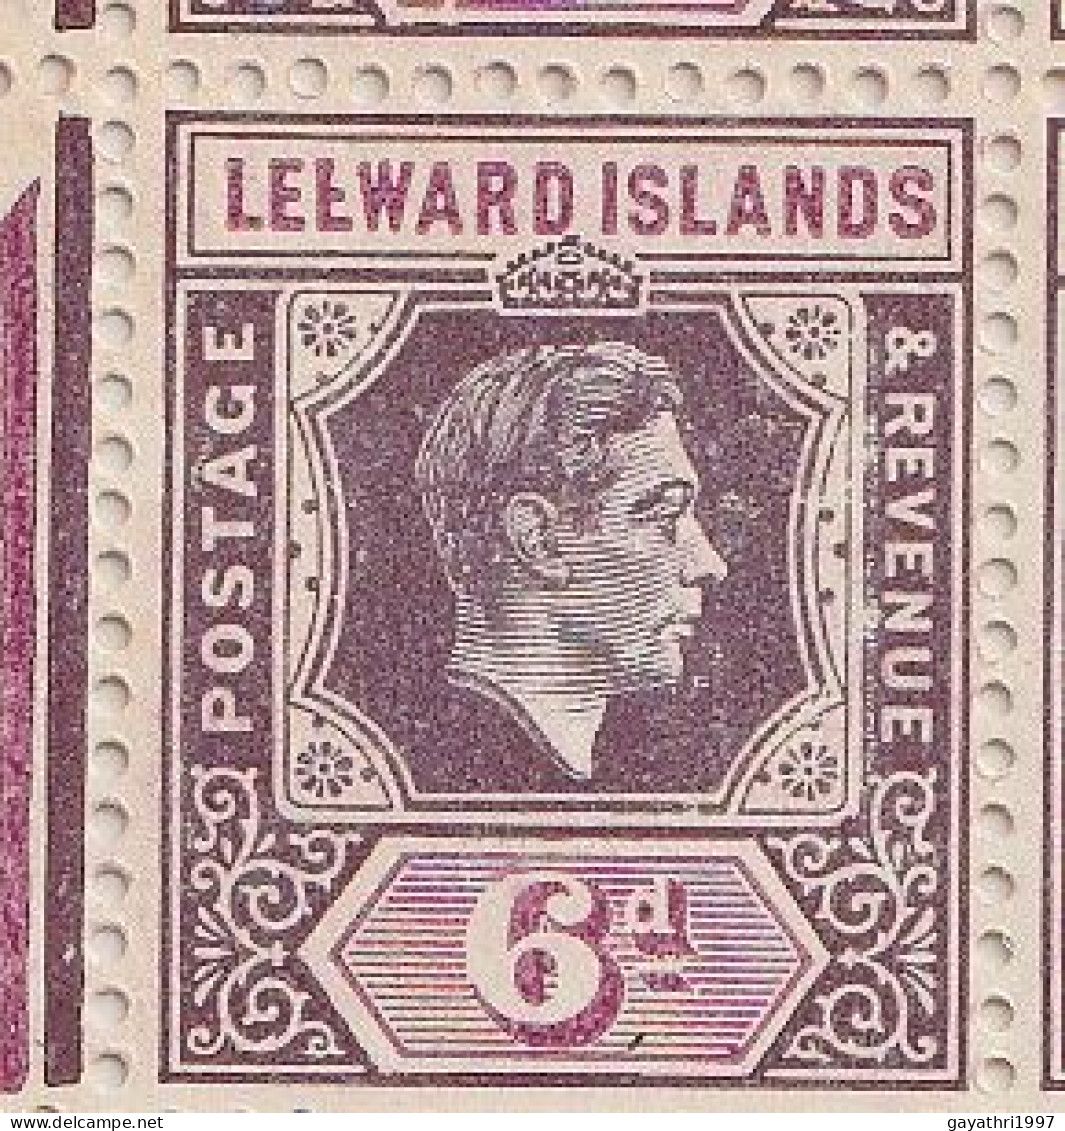 Leeward Island 1942 SG 109 Block Of 15 Stamps With Errors And Variety's, E Broken Left Row 4th Stamp (SG109 Ab)and(sh16) - Varietà, Errori & Curiosità